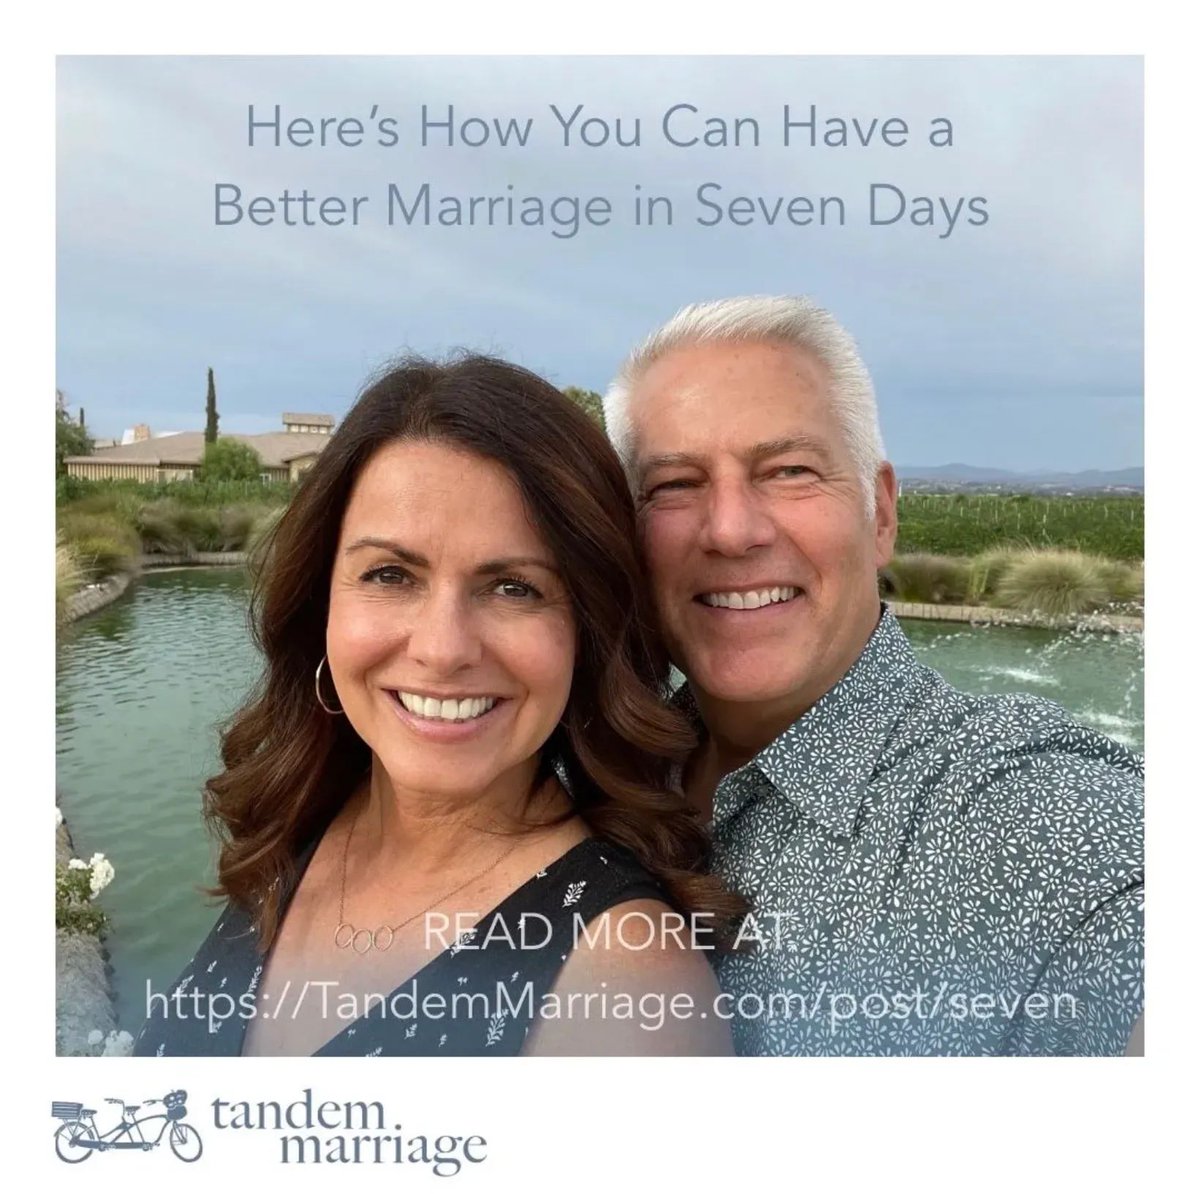 Here’s How You Can Have a Better Marriage in Just Seven Days!
 
Can reading this article and changing a few things in life improve your marriage? We absolutely think so! What are you waiting for?
 
TandemMarriage.com/post/seven
 
#MarriageGoals #MarriageEducation #TeamUs #GuyGetsGirl